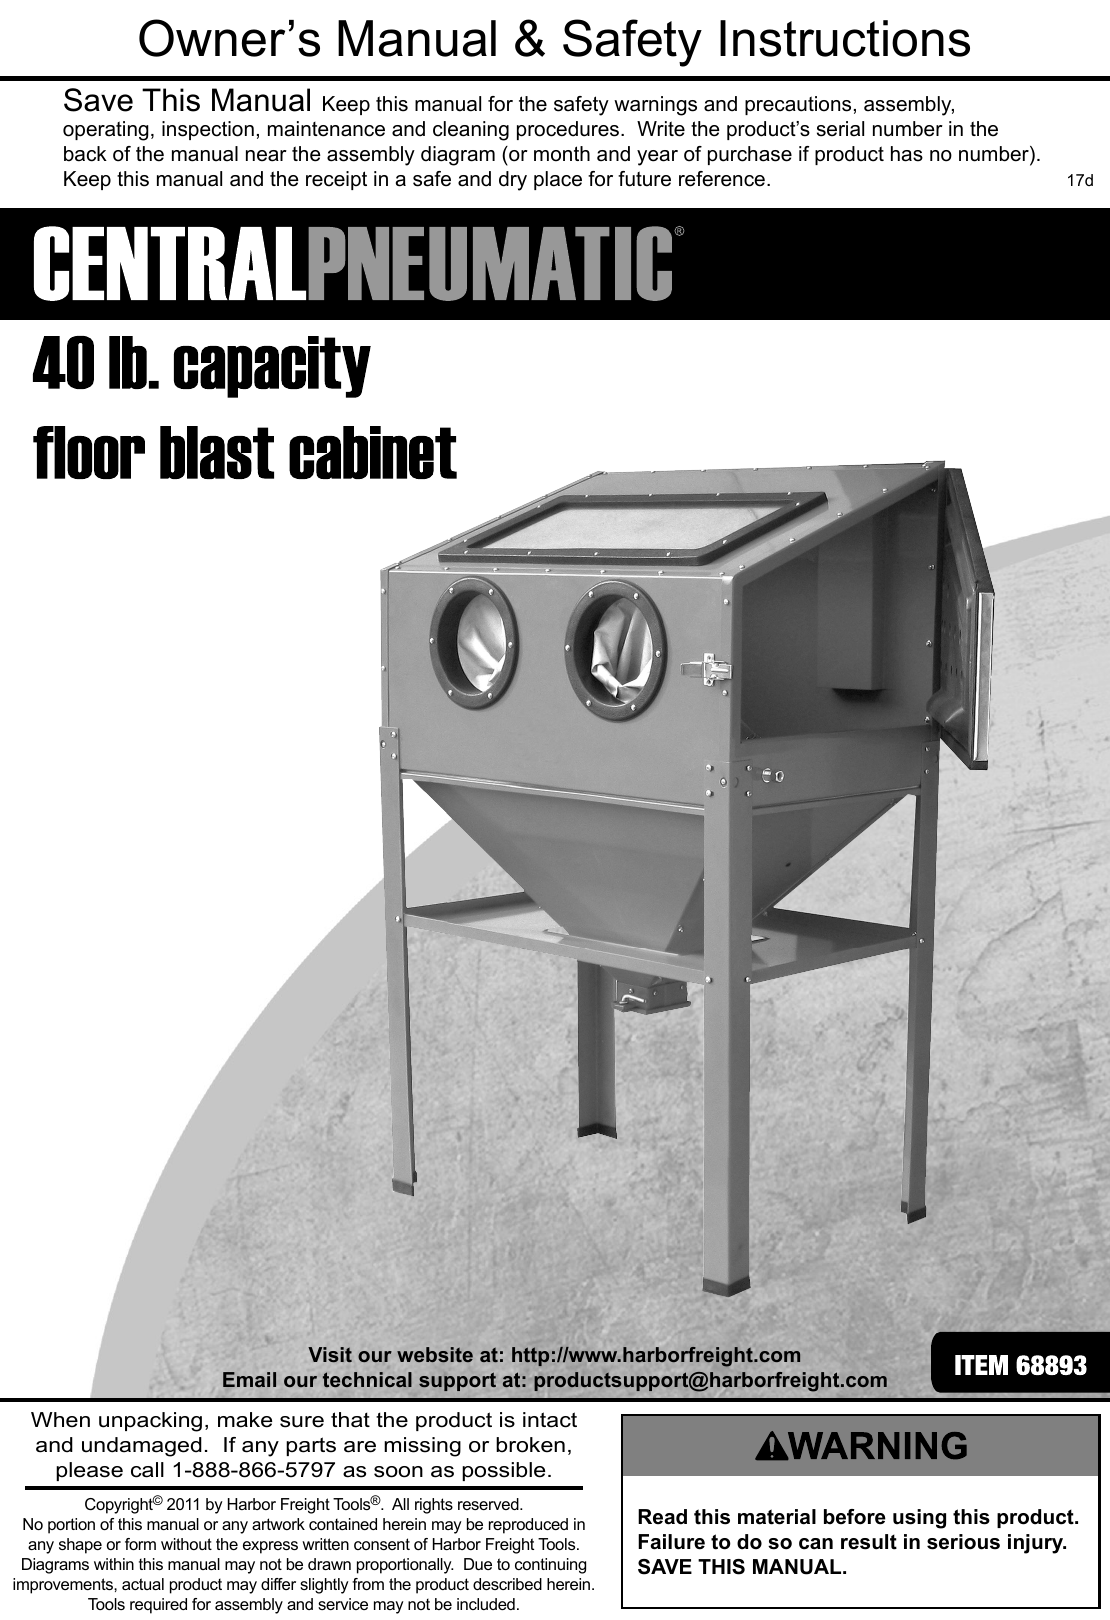 Manual For The 68893 40 Lb Capacity Floor Blast Cabinet